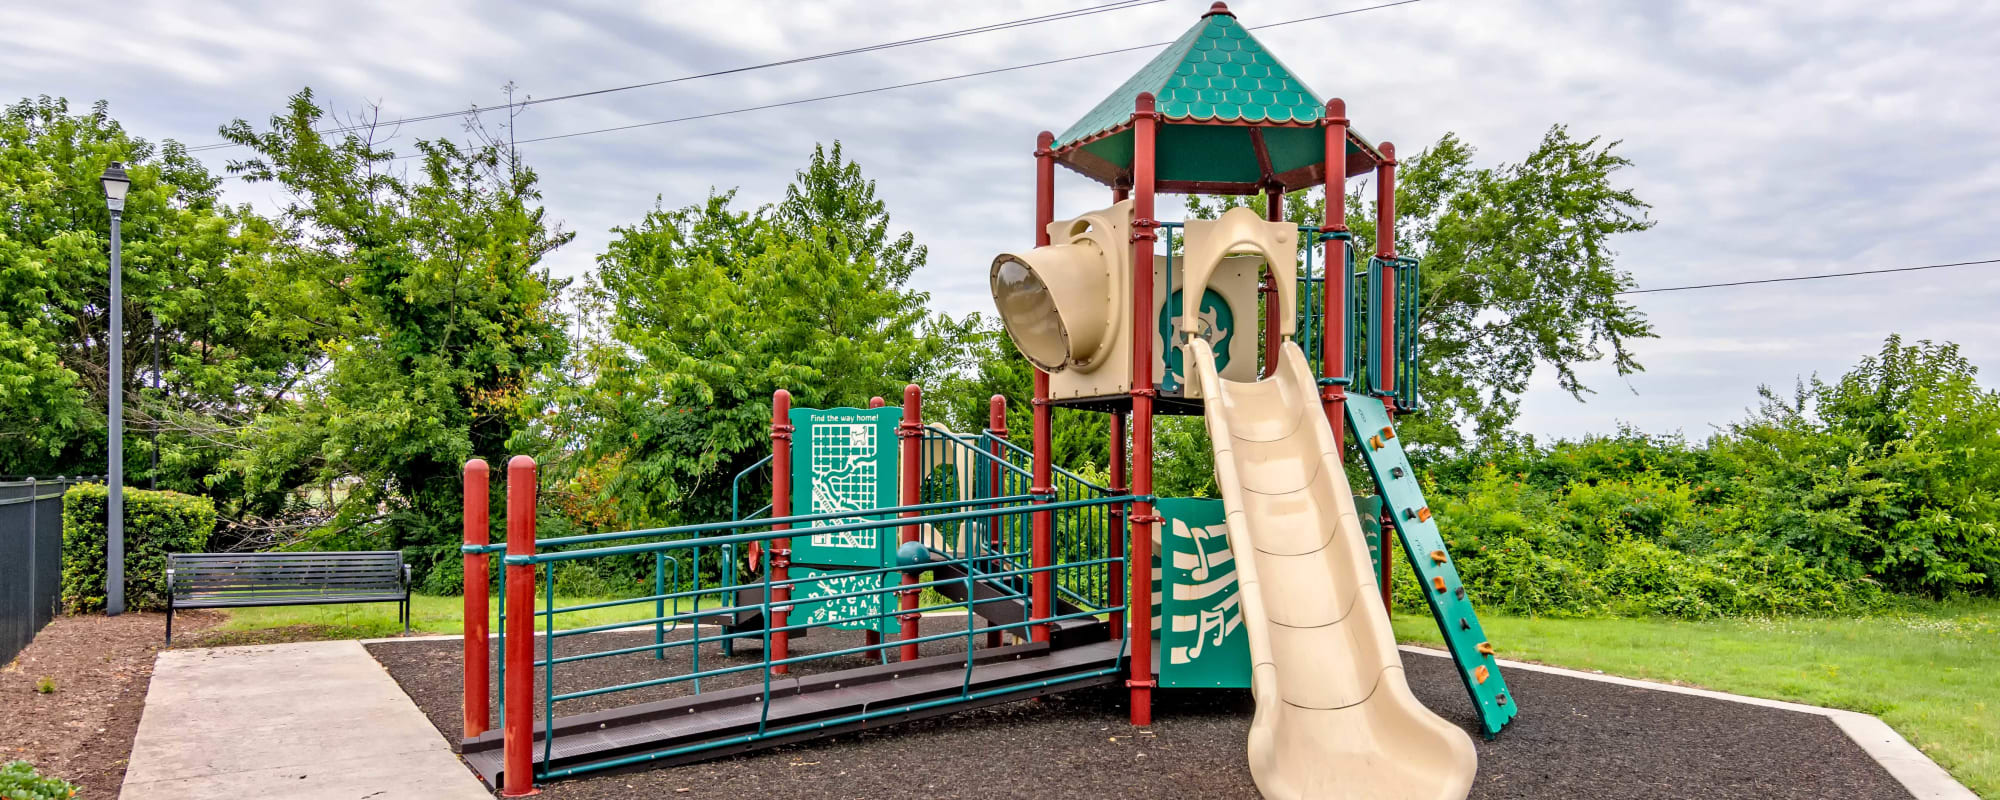 Slide at playground at Willoughby Bay in Norfolk, Virginia